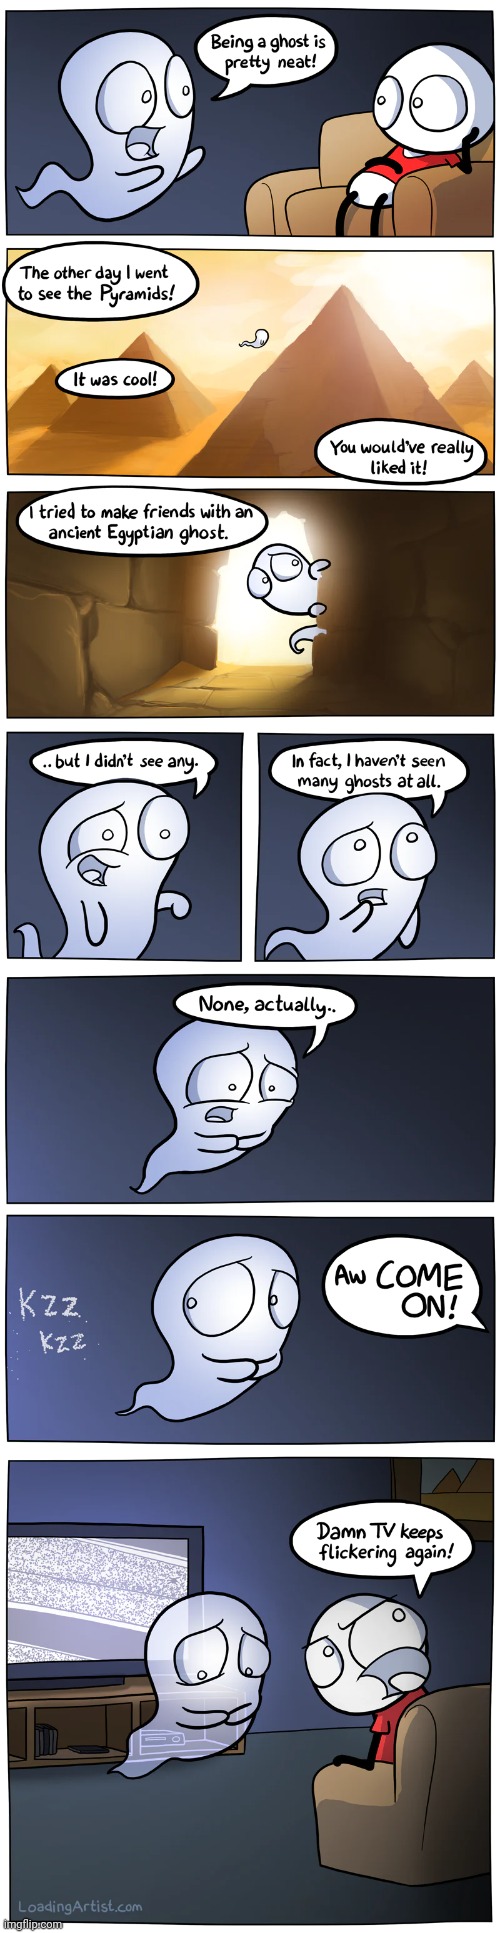 He got ghosted | image tagged in ghosts,tv,comics/cartoons,memes | made w/ Imgflip meme maker